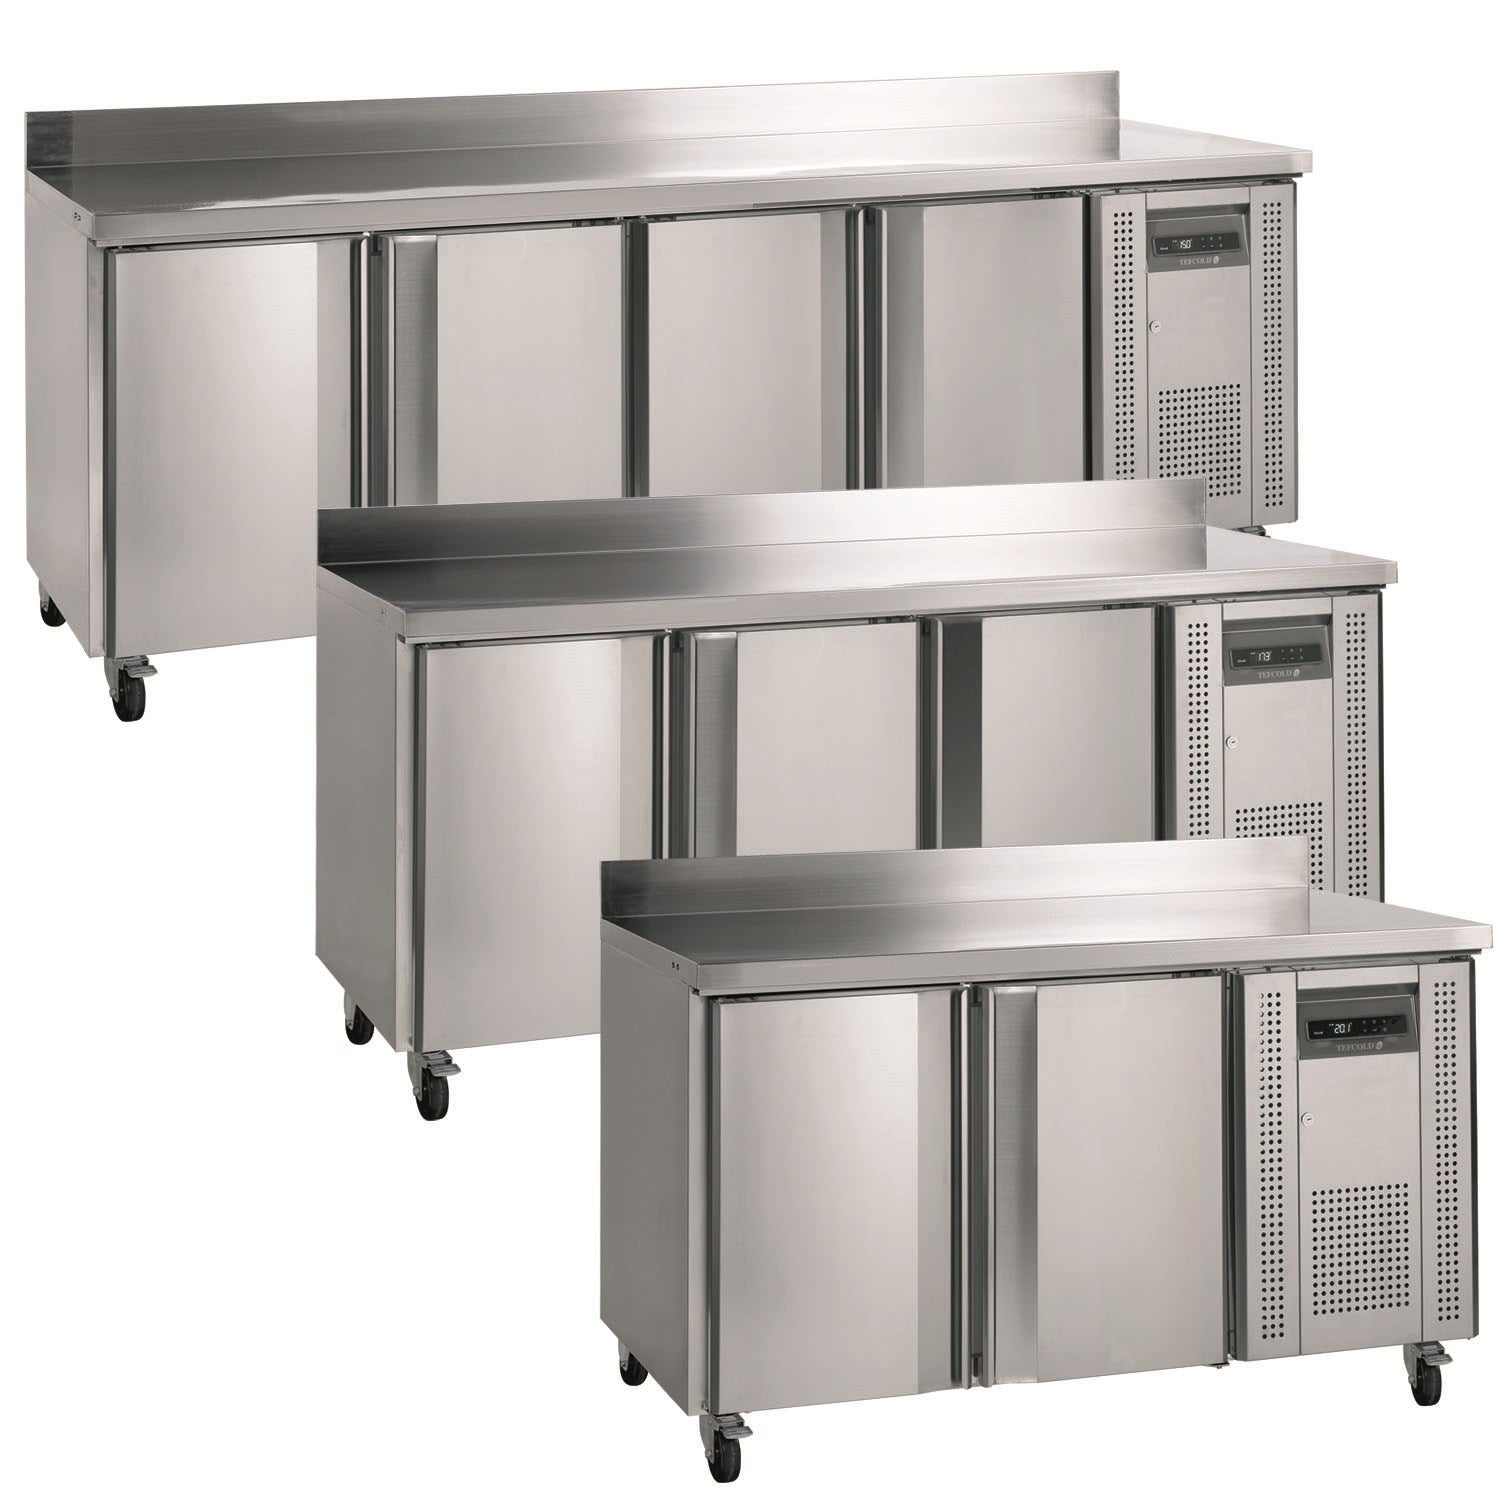 Tefcold CK Range Gastronorm Counter WX195 HX980 DX700.Product Ref:00153.MODEL:CK7310-🚚 1-3 Days Delivery